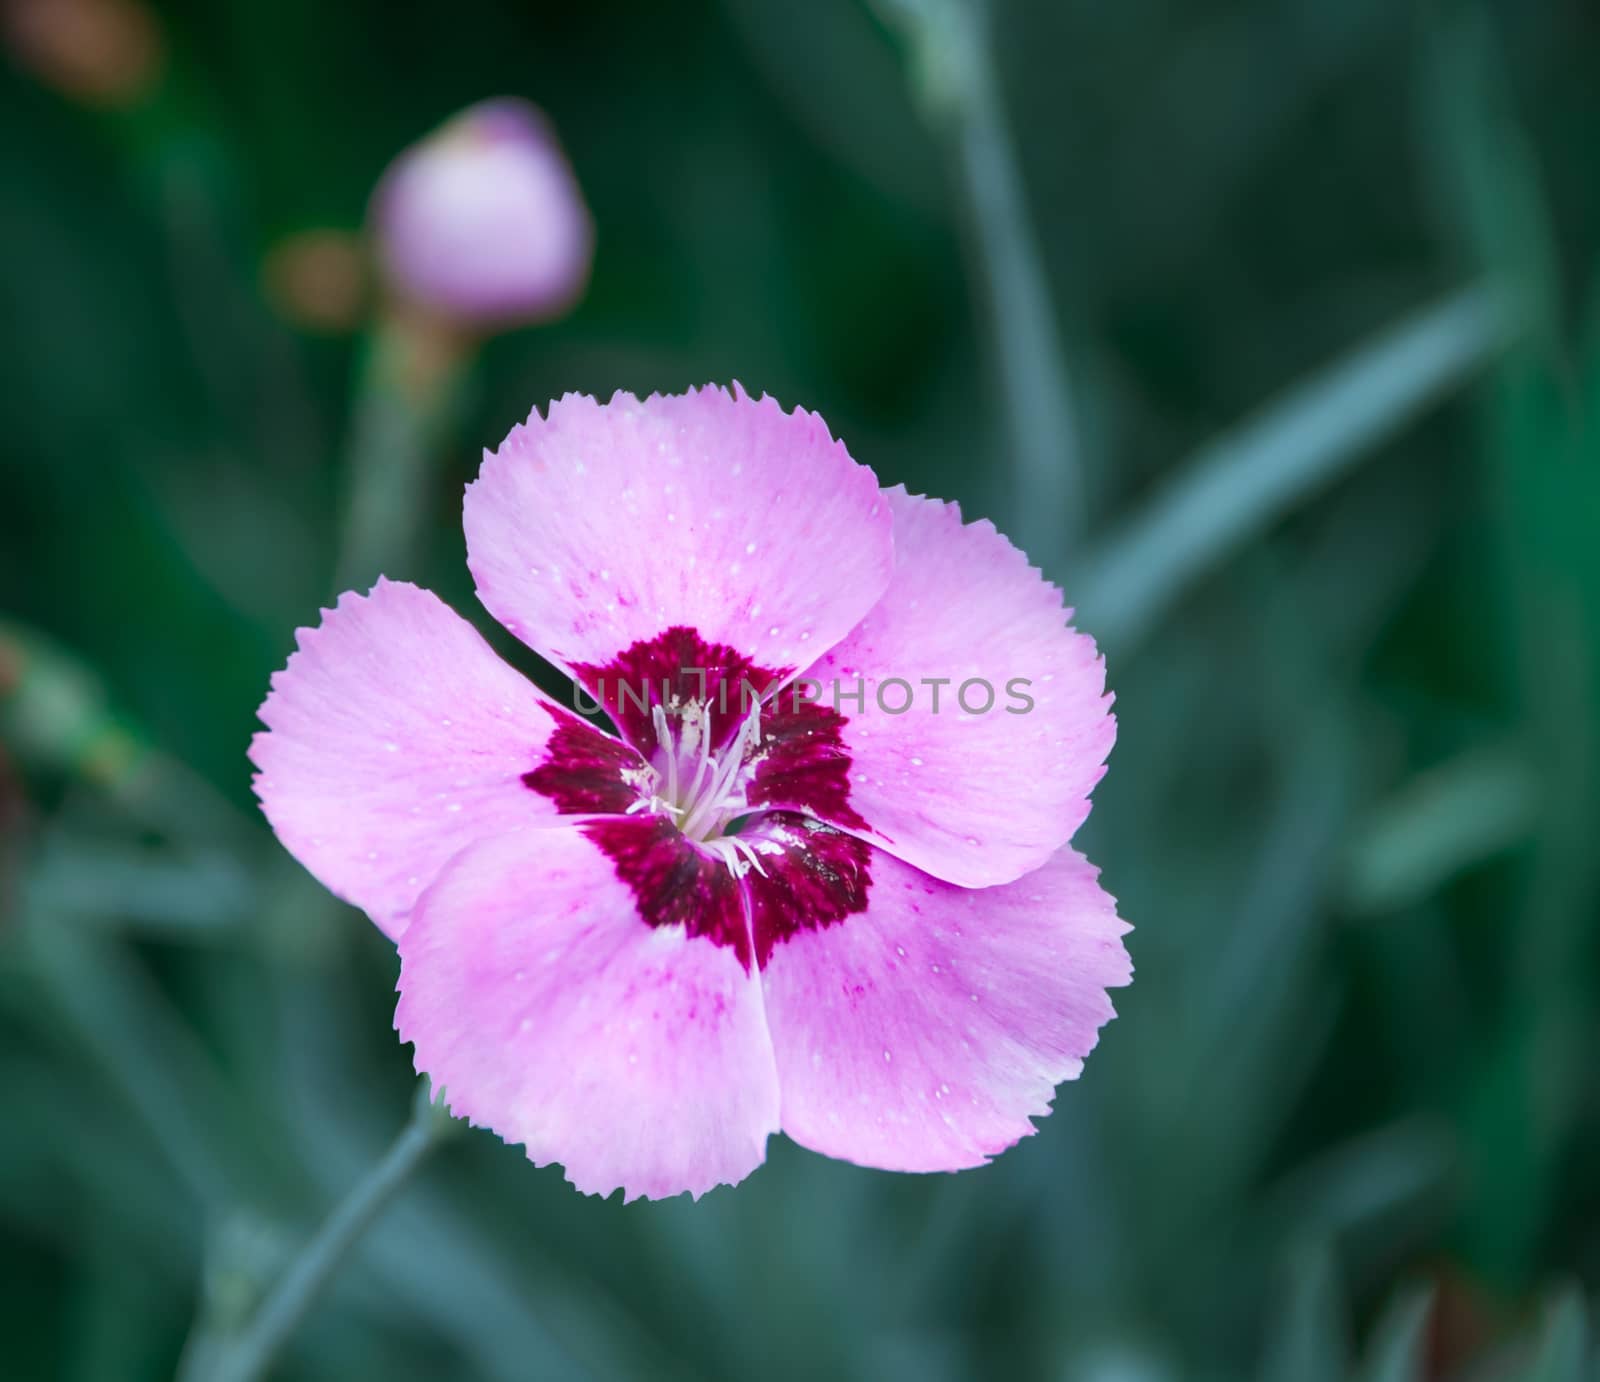 Wild pink carnation on natural background , there are pictures of this series